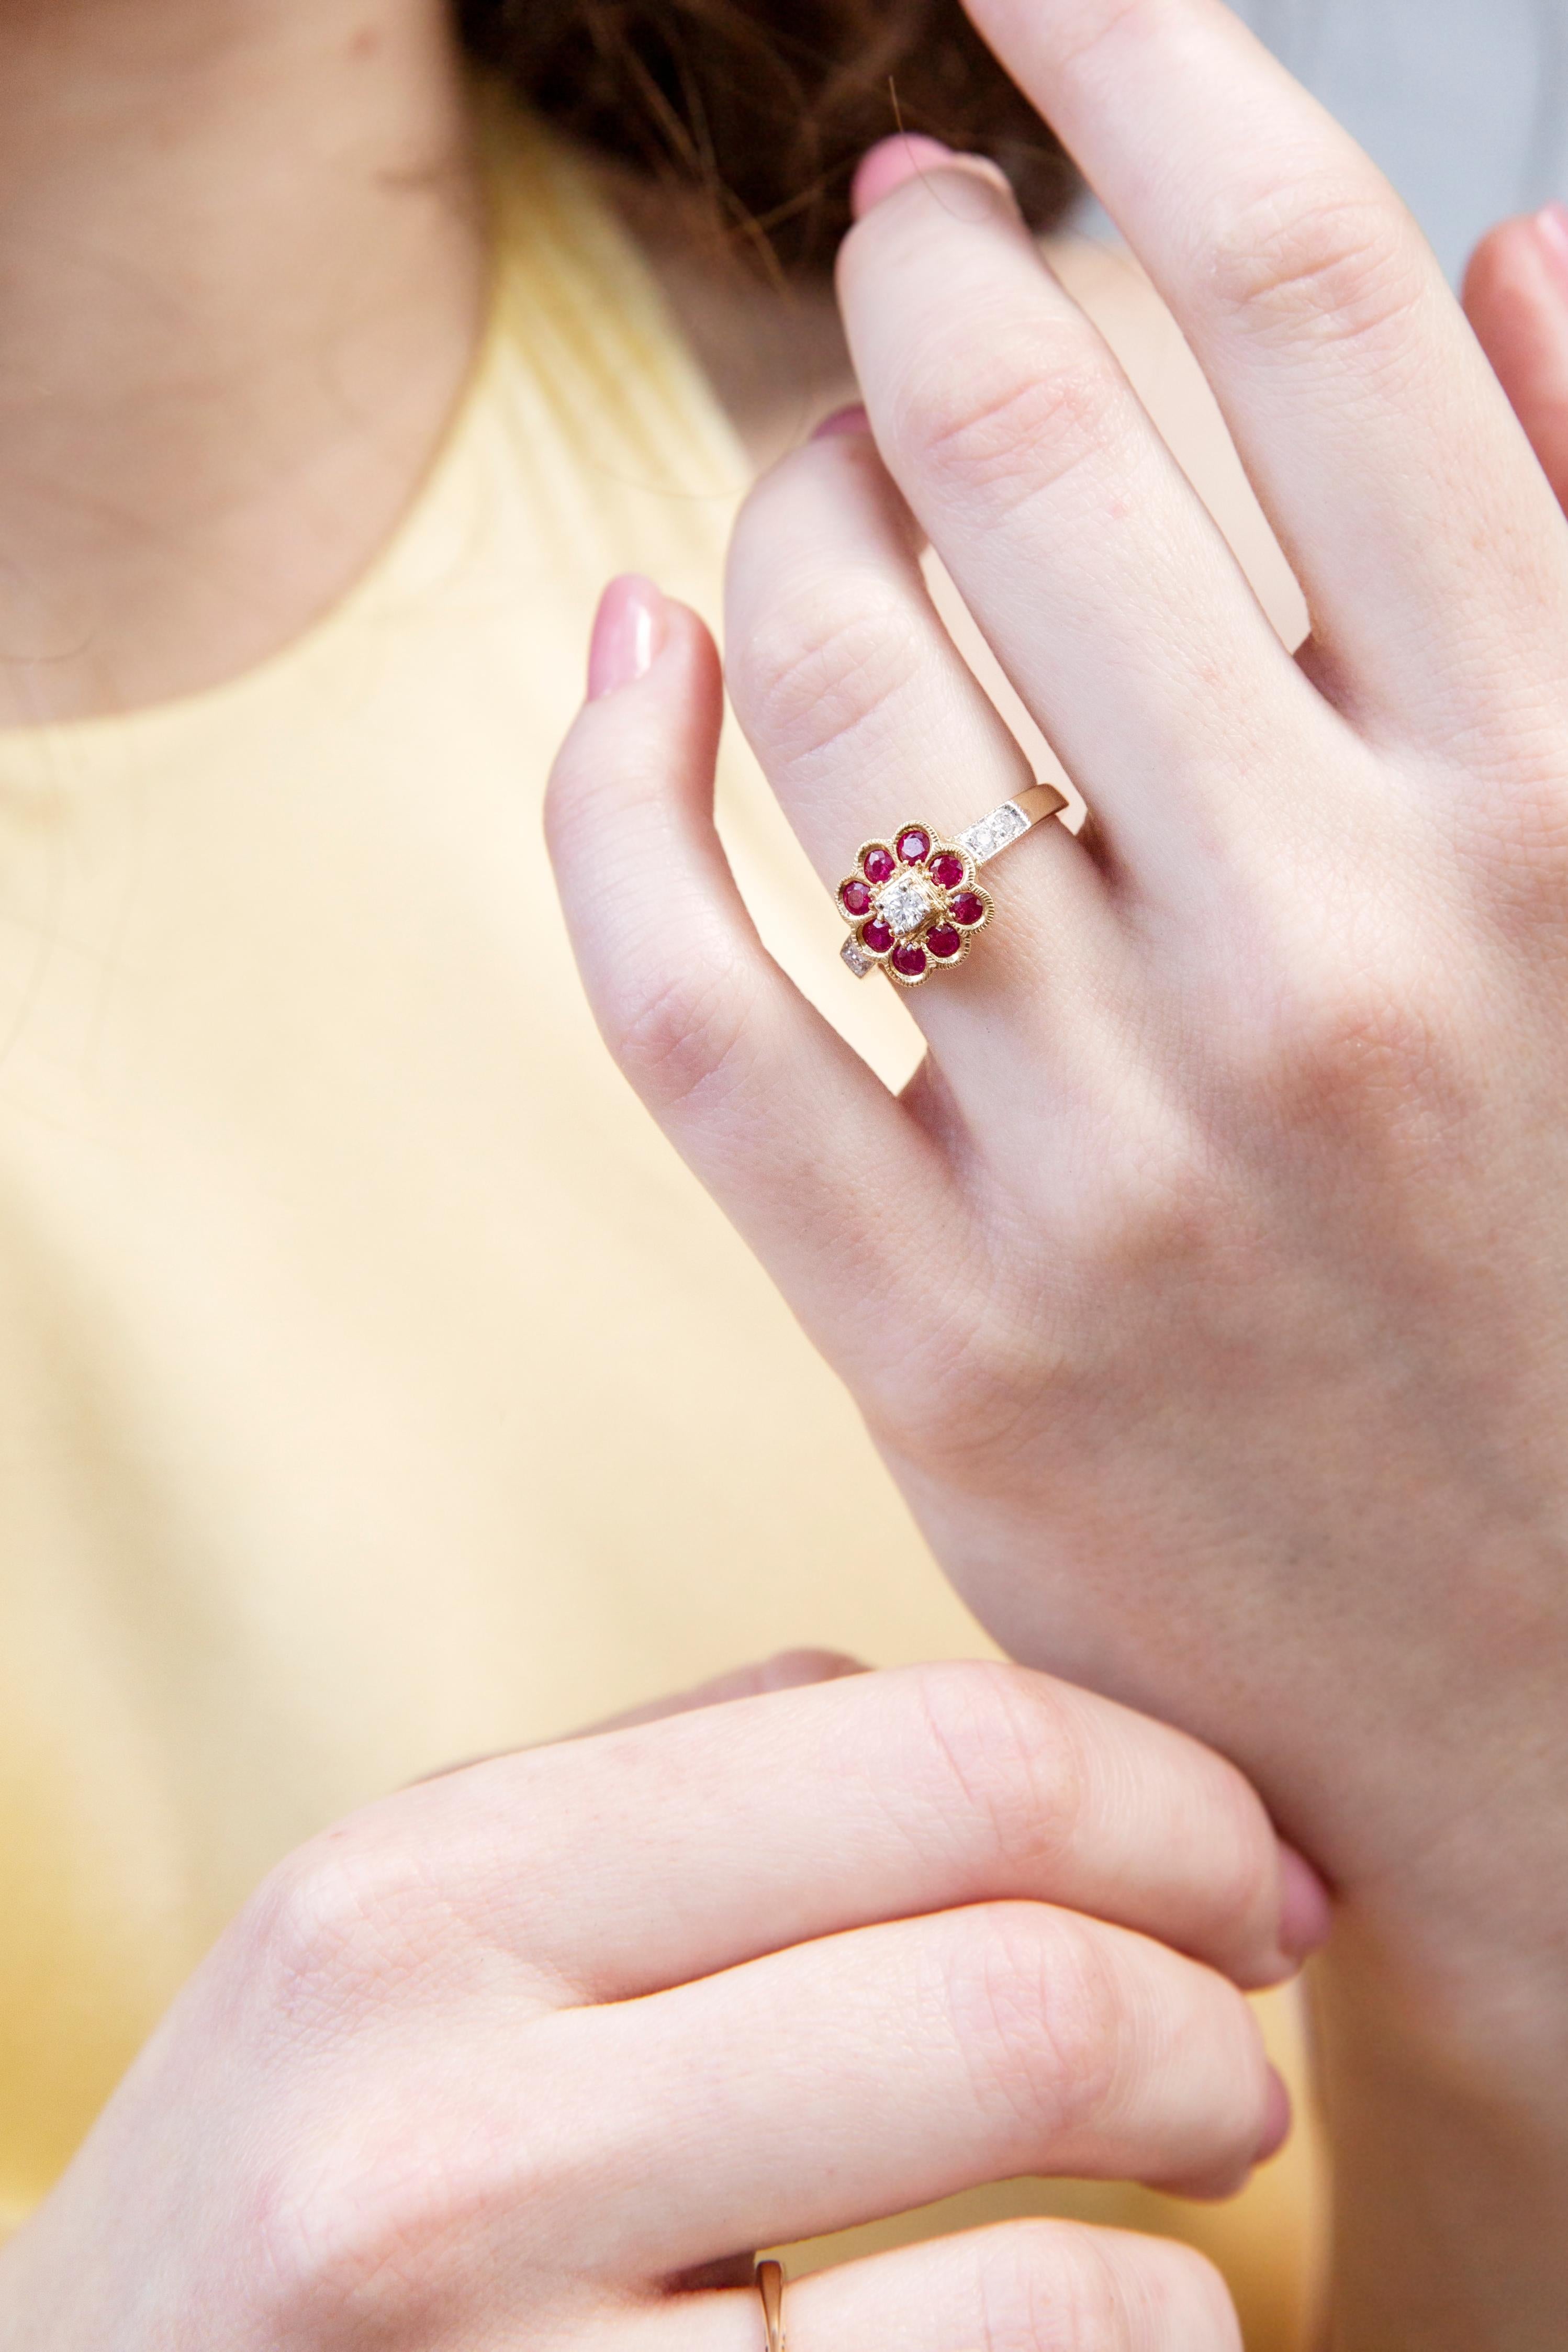 The 9 carat gold Helena Ring with her flower of rose hued rubies and shimmering diamonds would be the sweetest of gifts for your love. The curtain is not coming down on this love story anytime soon.

The Helena Ring Gem Details
The bright deep red